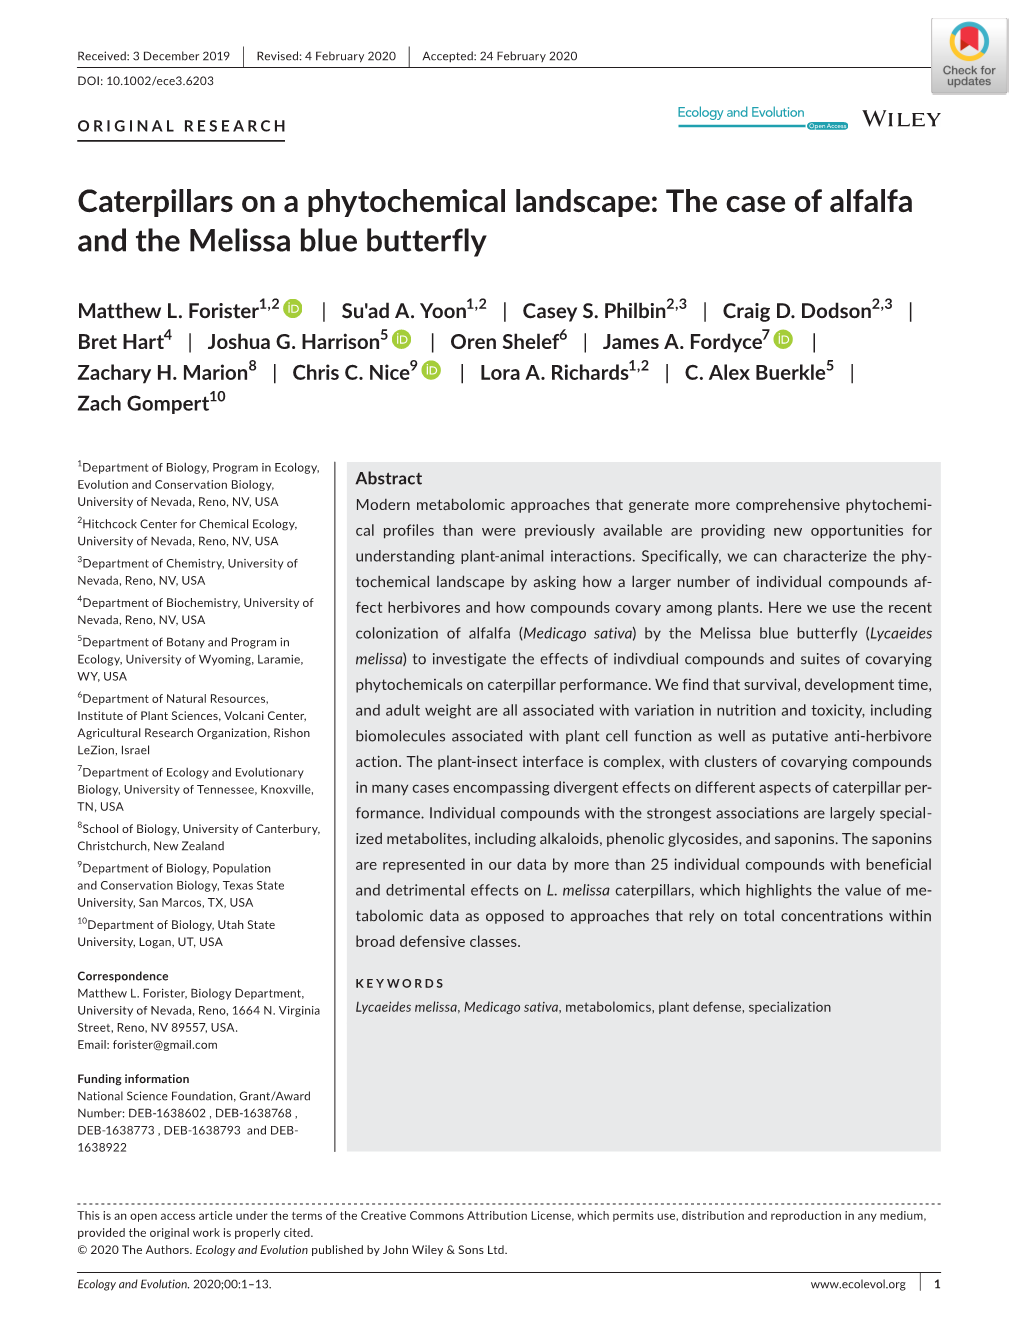 Caterpillars on a Phytochemical Landscape: the Case of Alfalfa and the Melissa Blue Butterfly